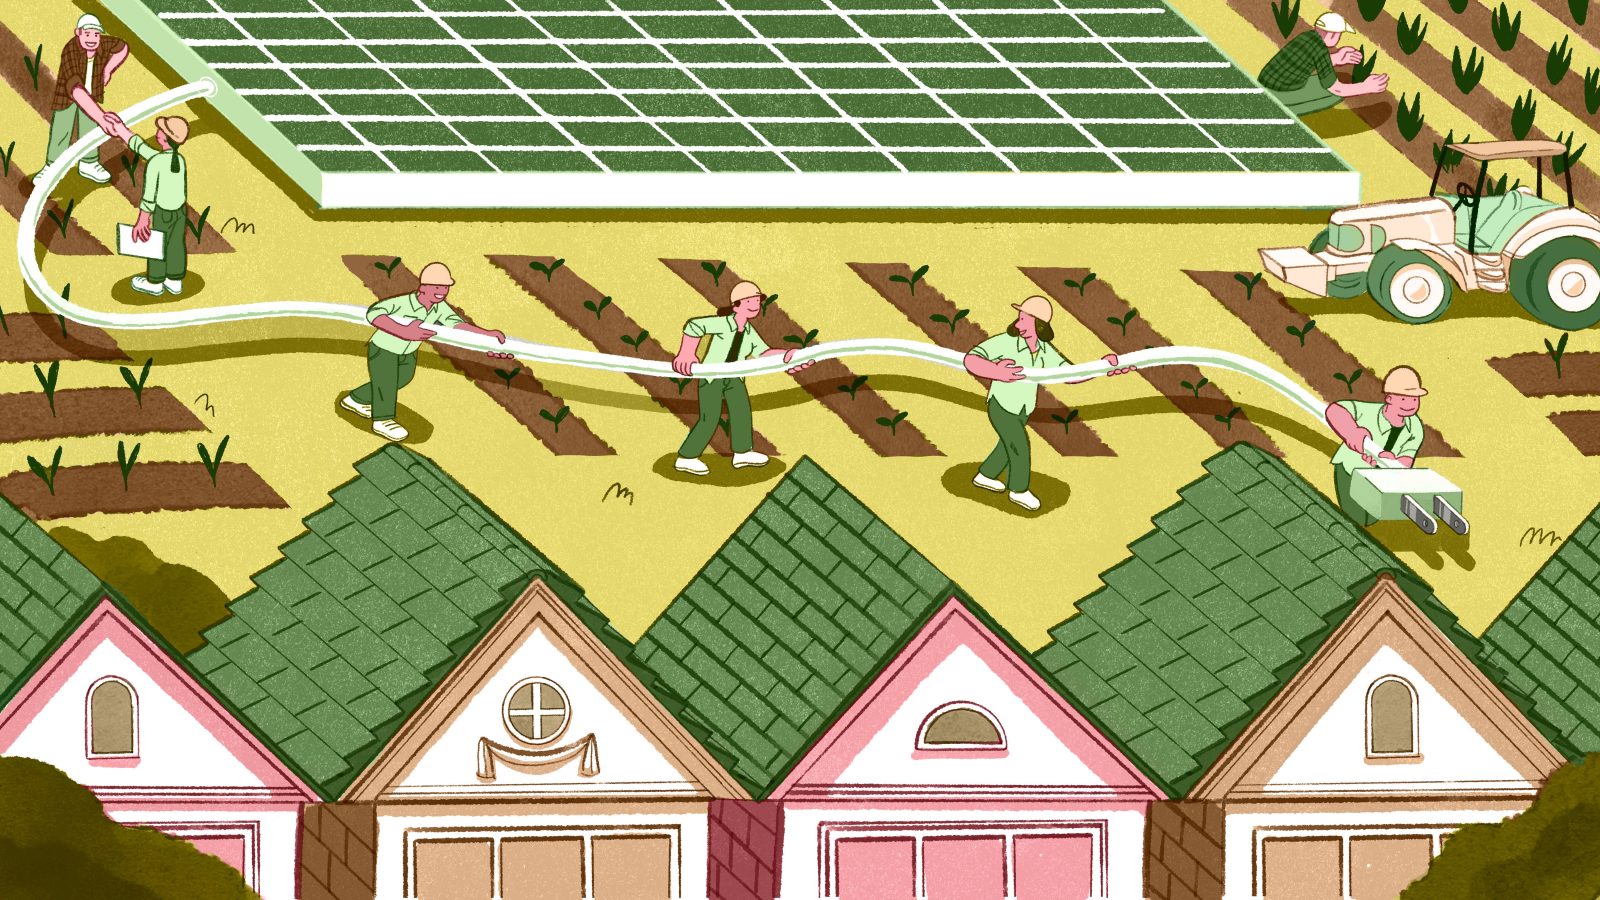 Illustration of solar energy workers